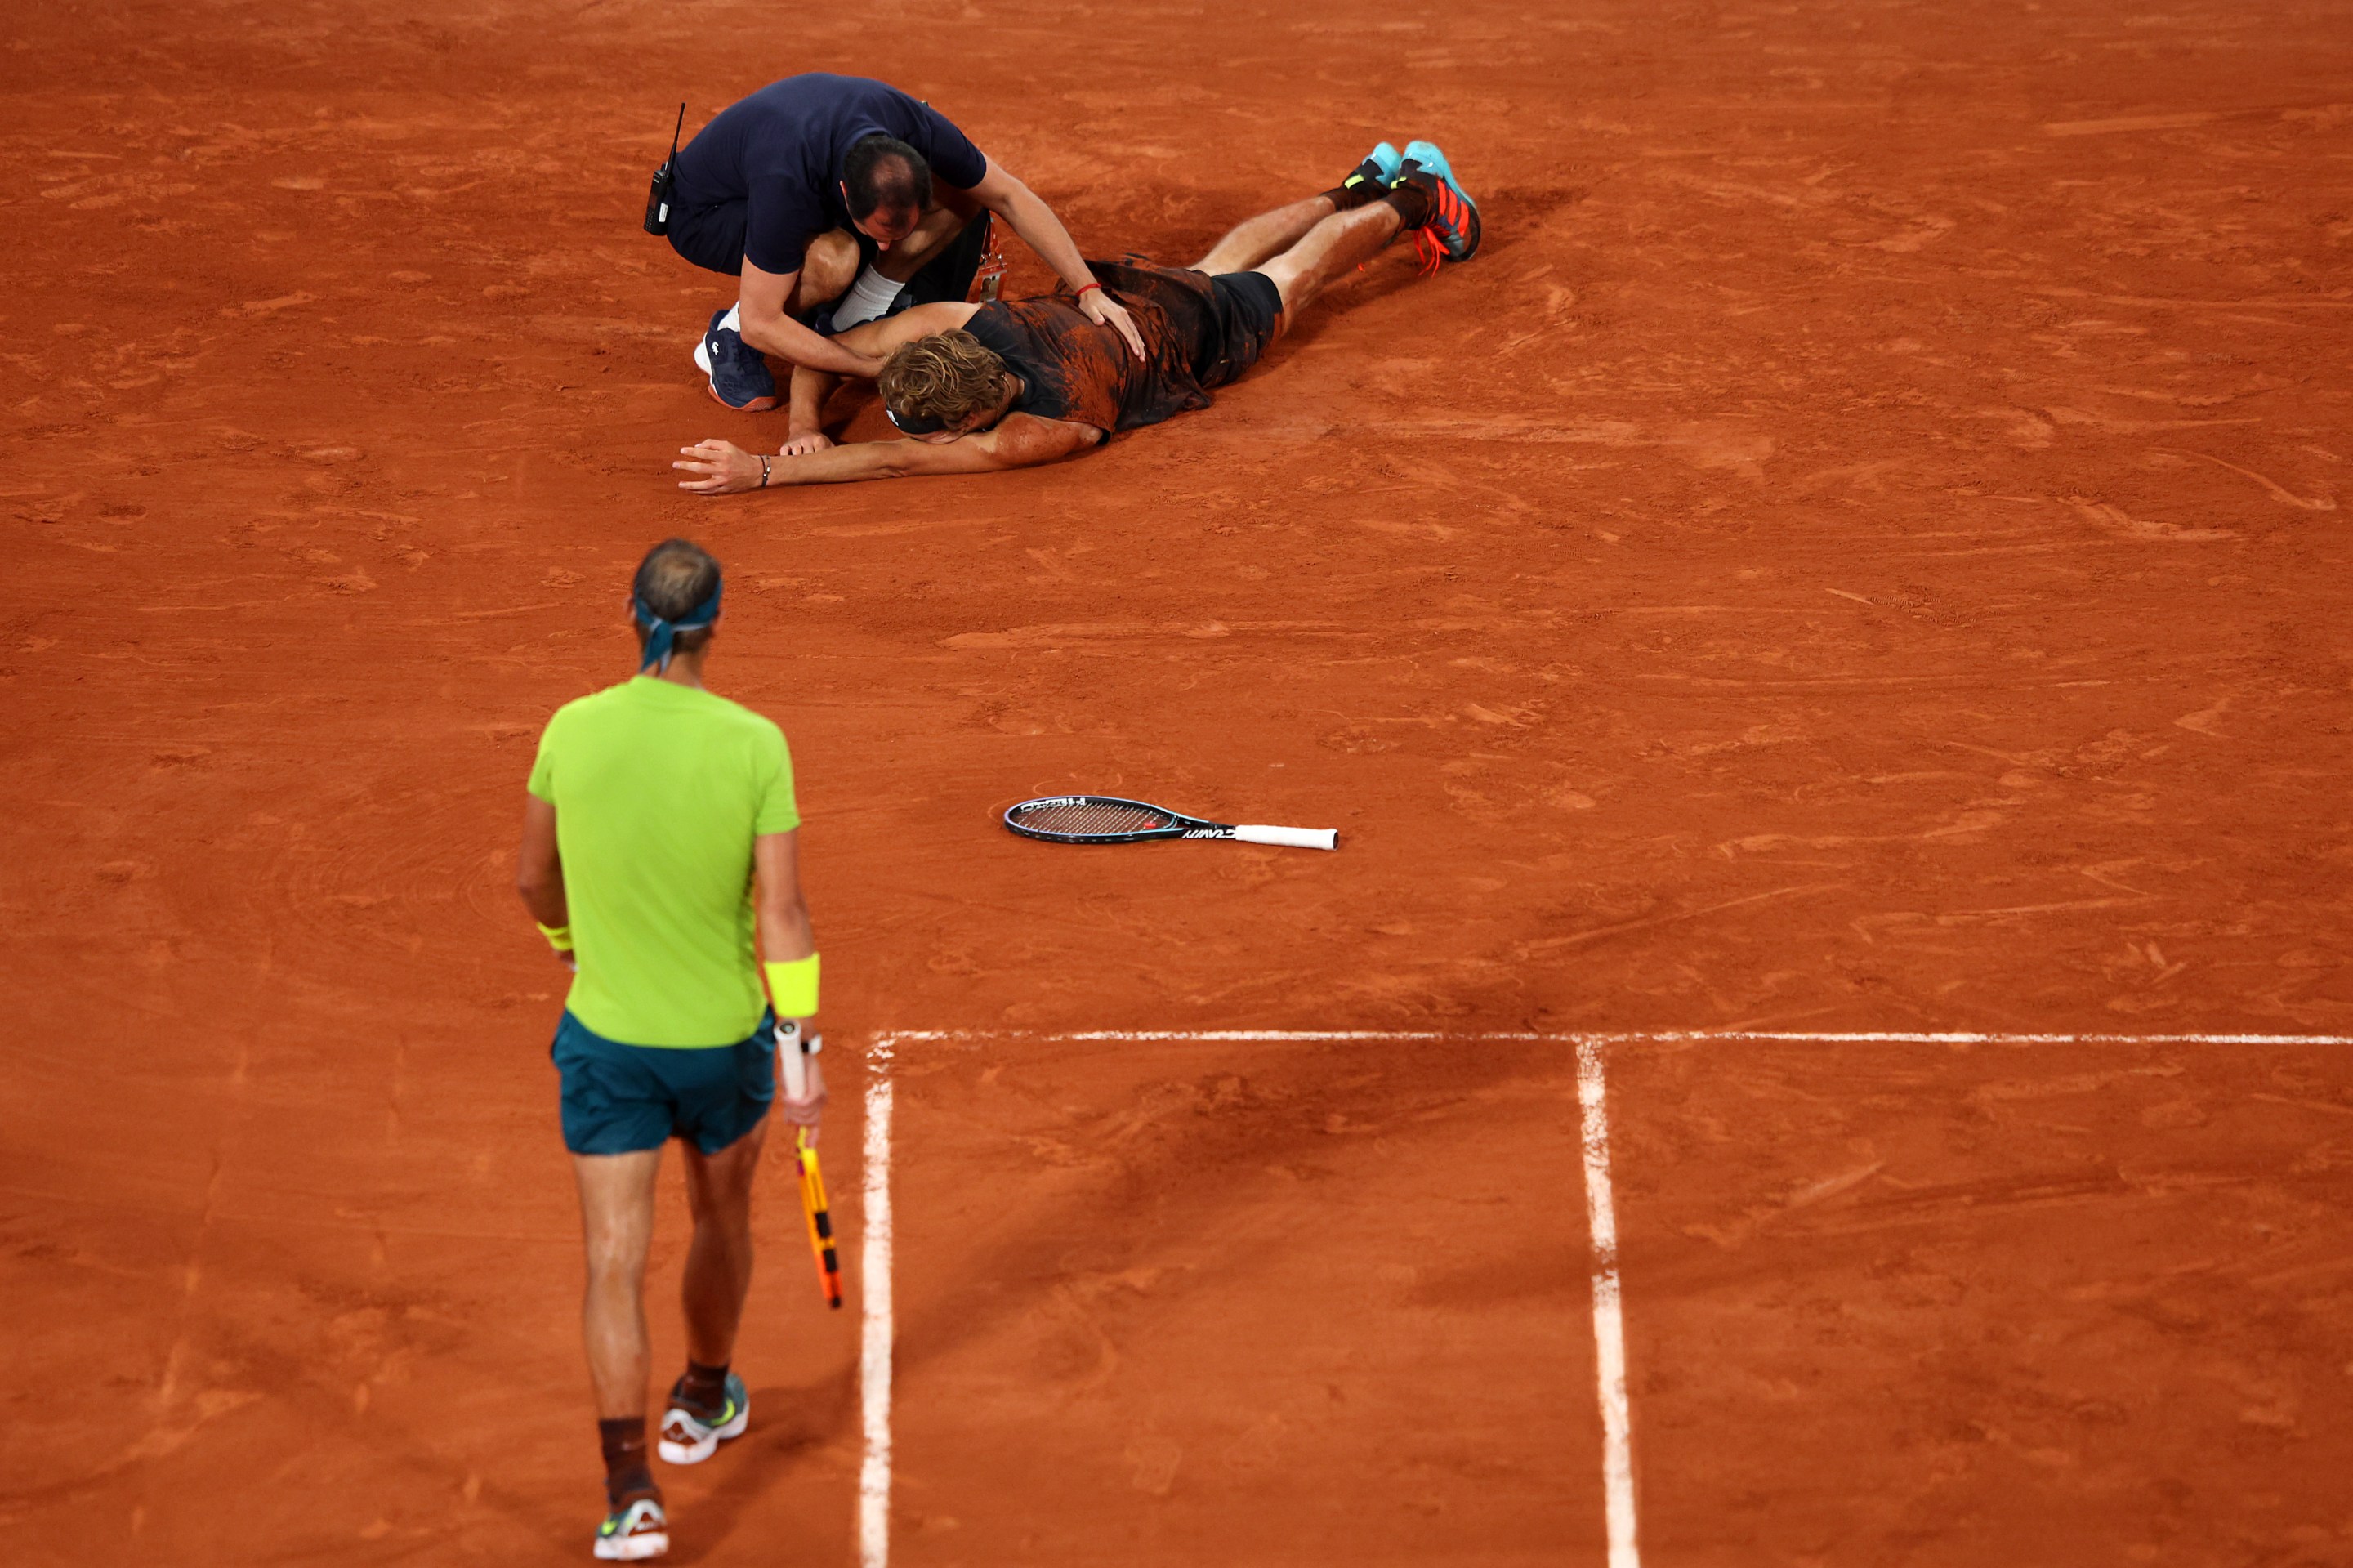 Alexander Zverev suffers a severe ankle injury at the French Open.